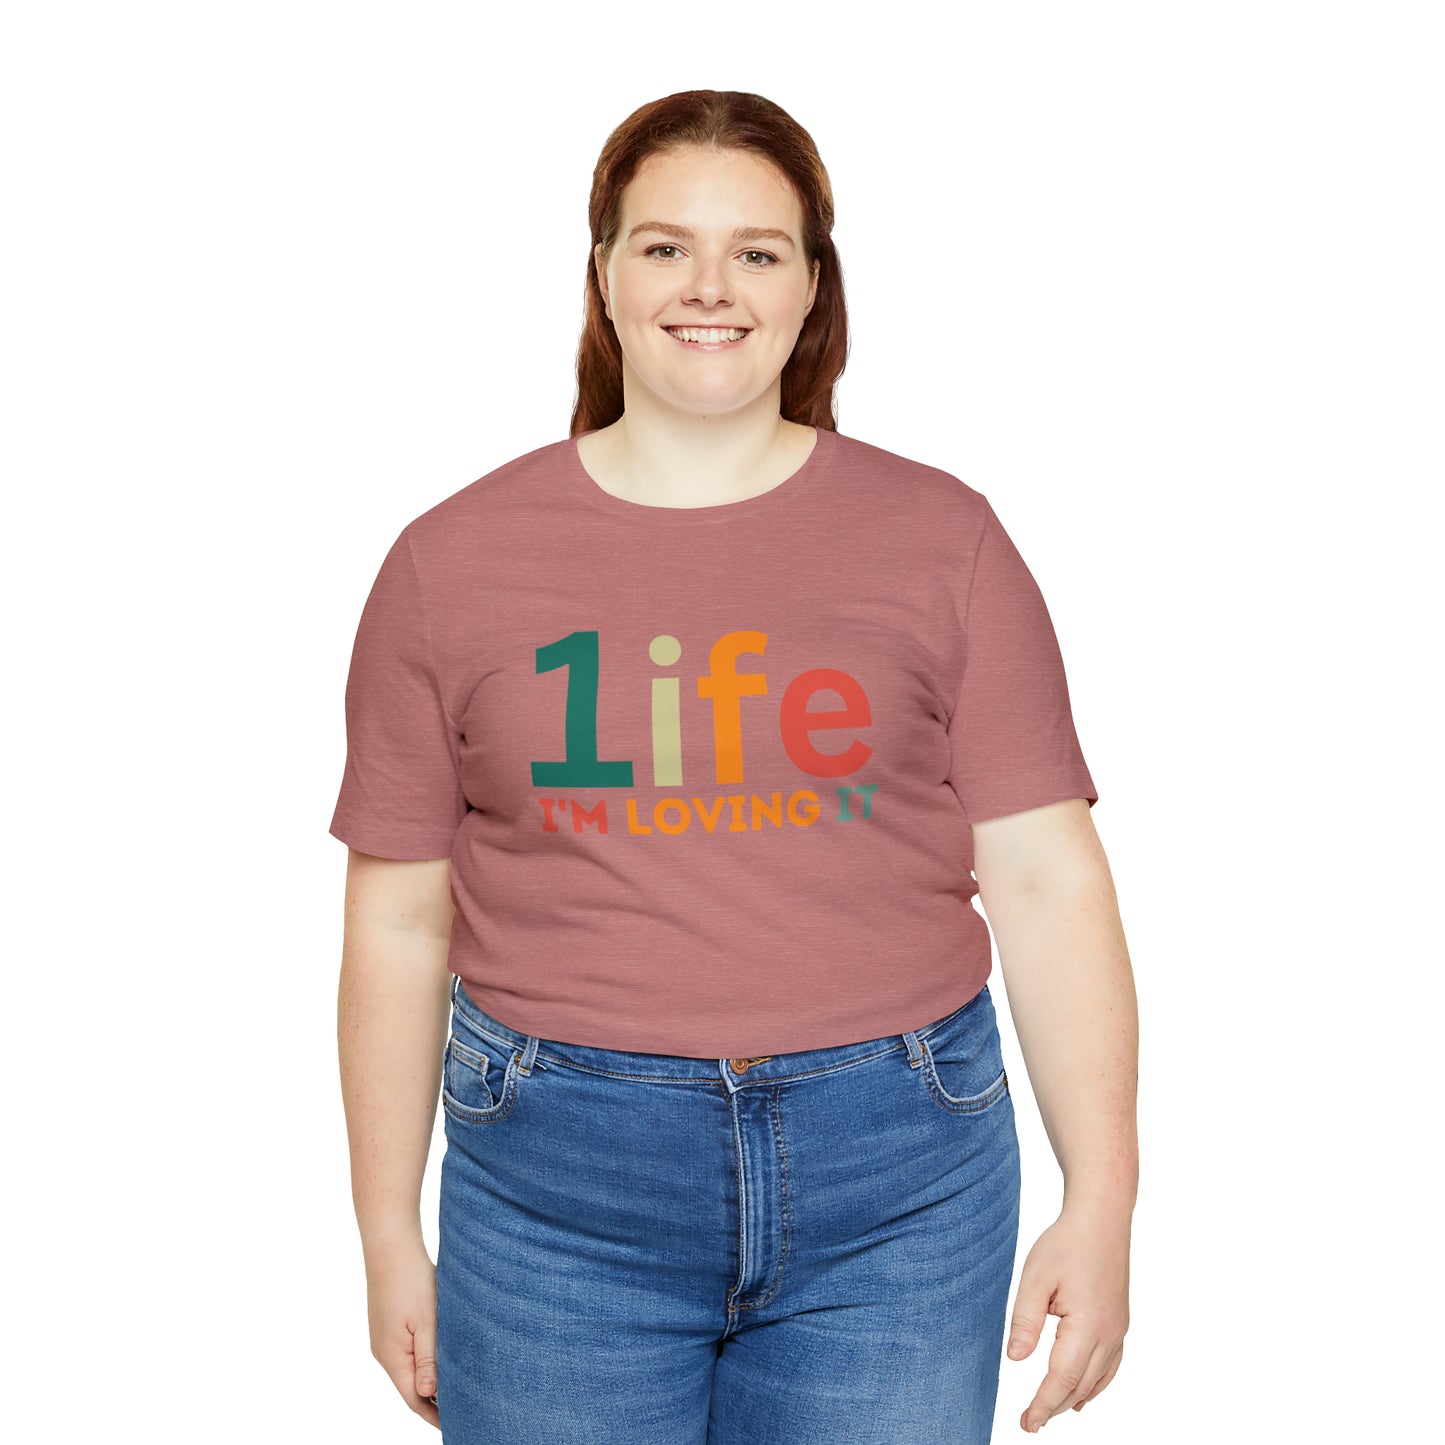 One life I'M Loving It Shirt Retro 1life shirt Live Your Life You Only Have One Life To Live Retro Shirt